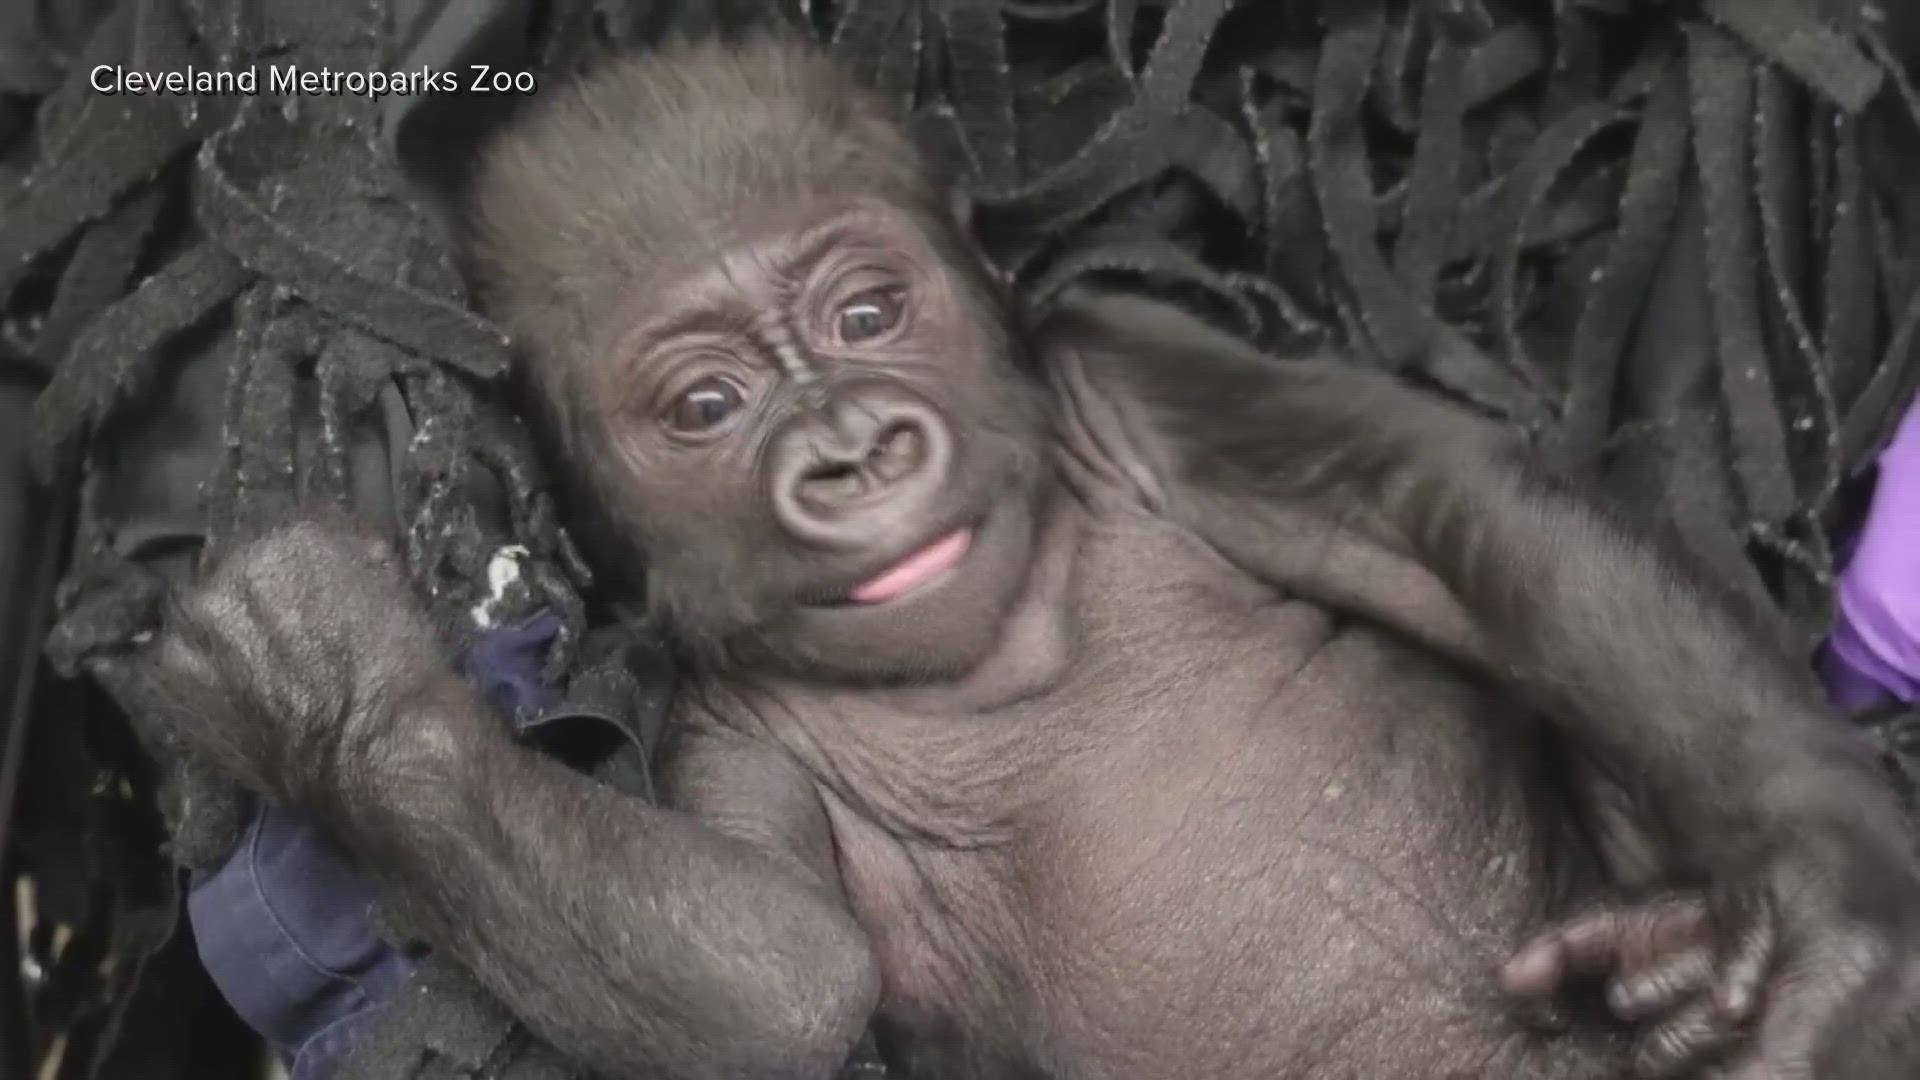 Zoo officials provided an update Wednesday on efforts to bond baby gorilla Jameela with a new foster mom.